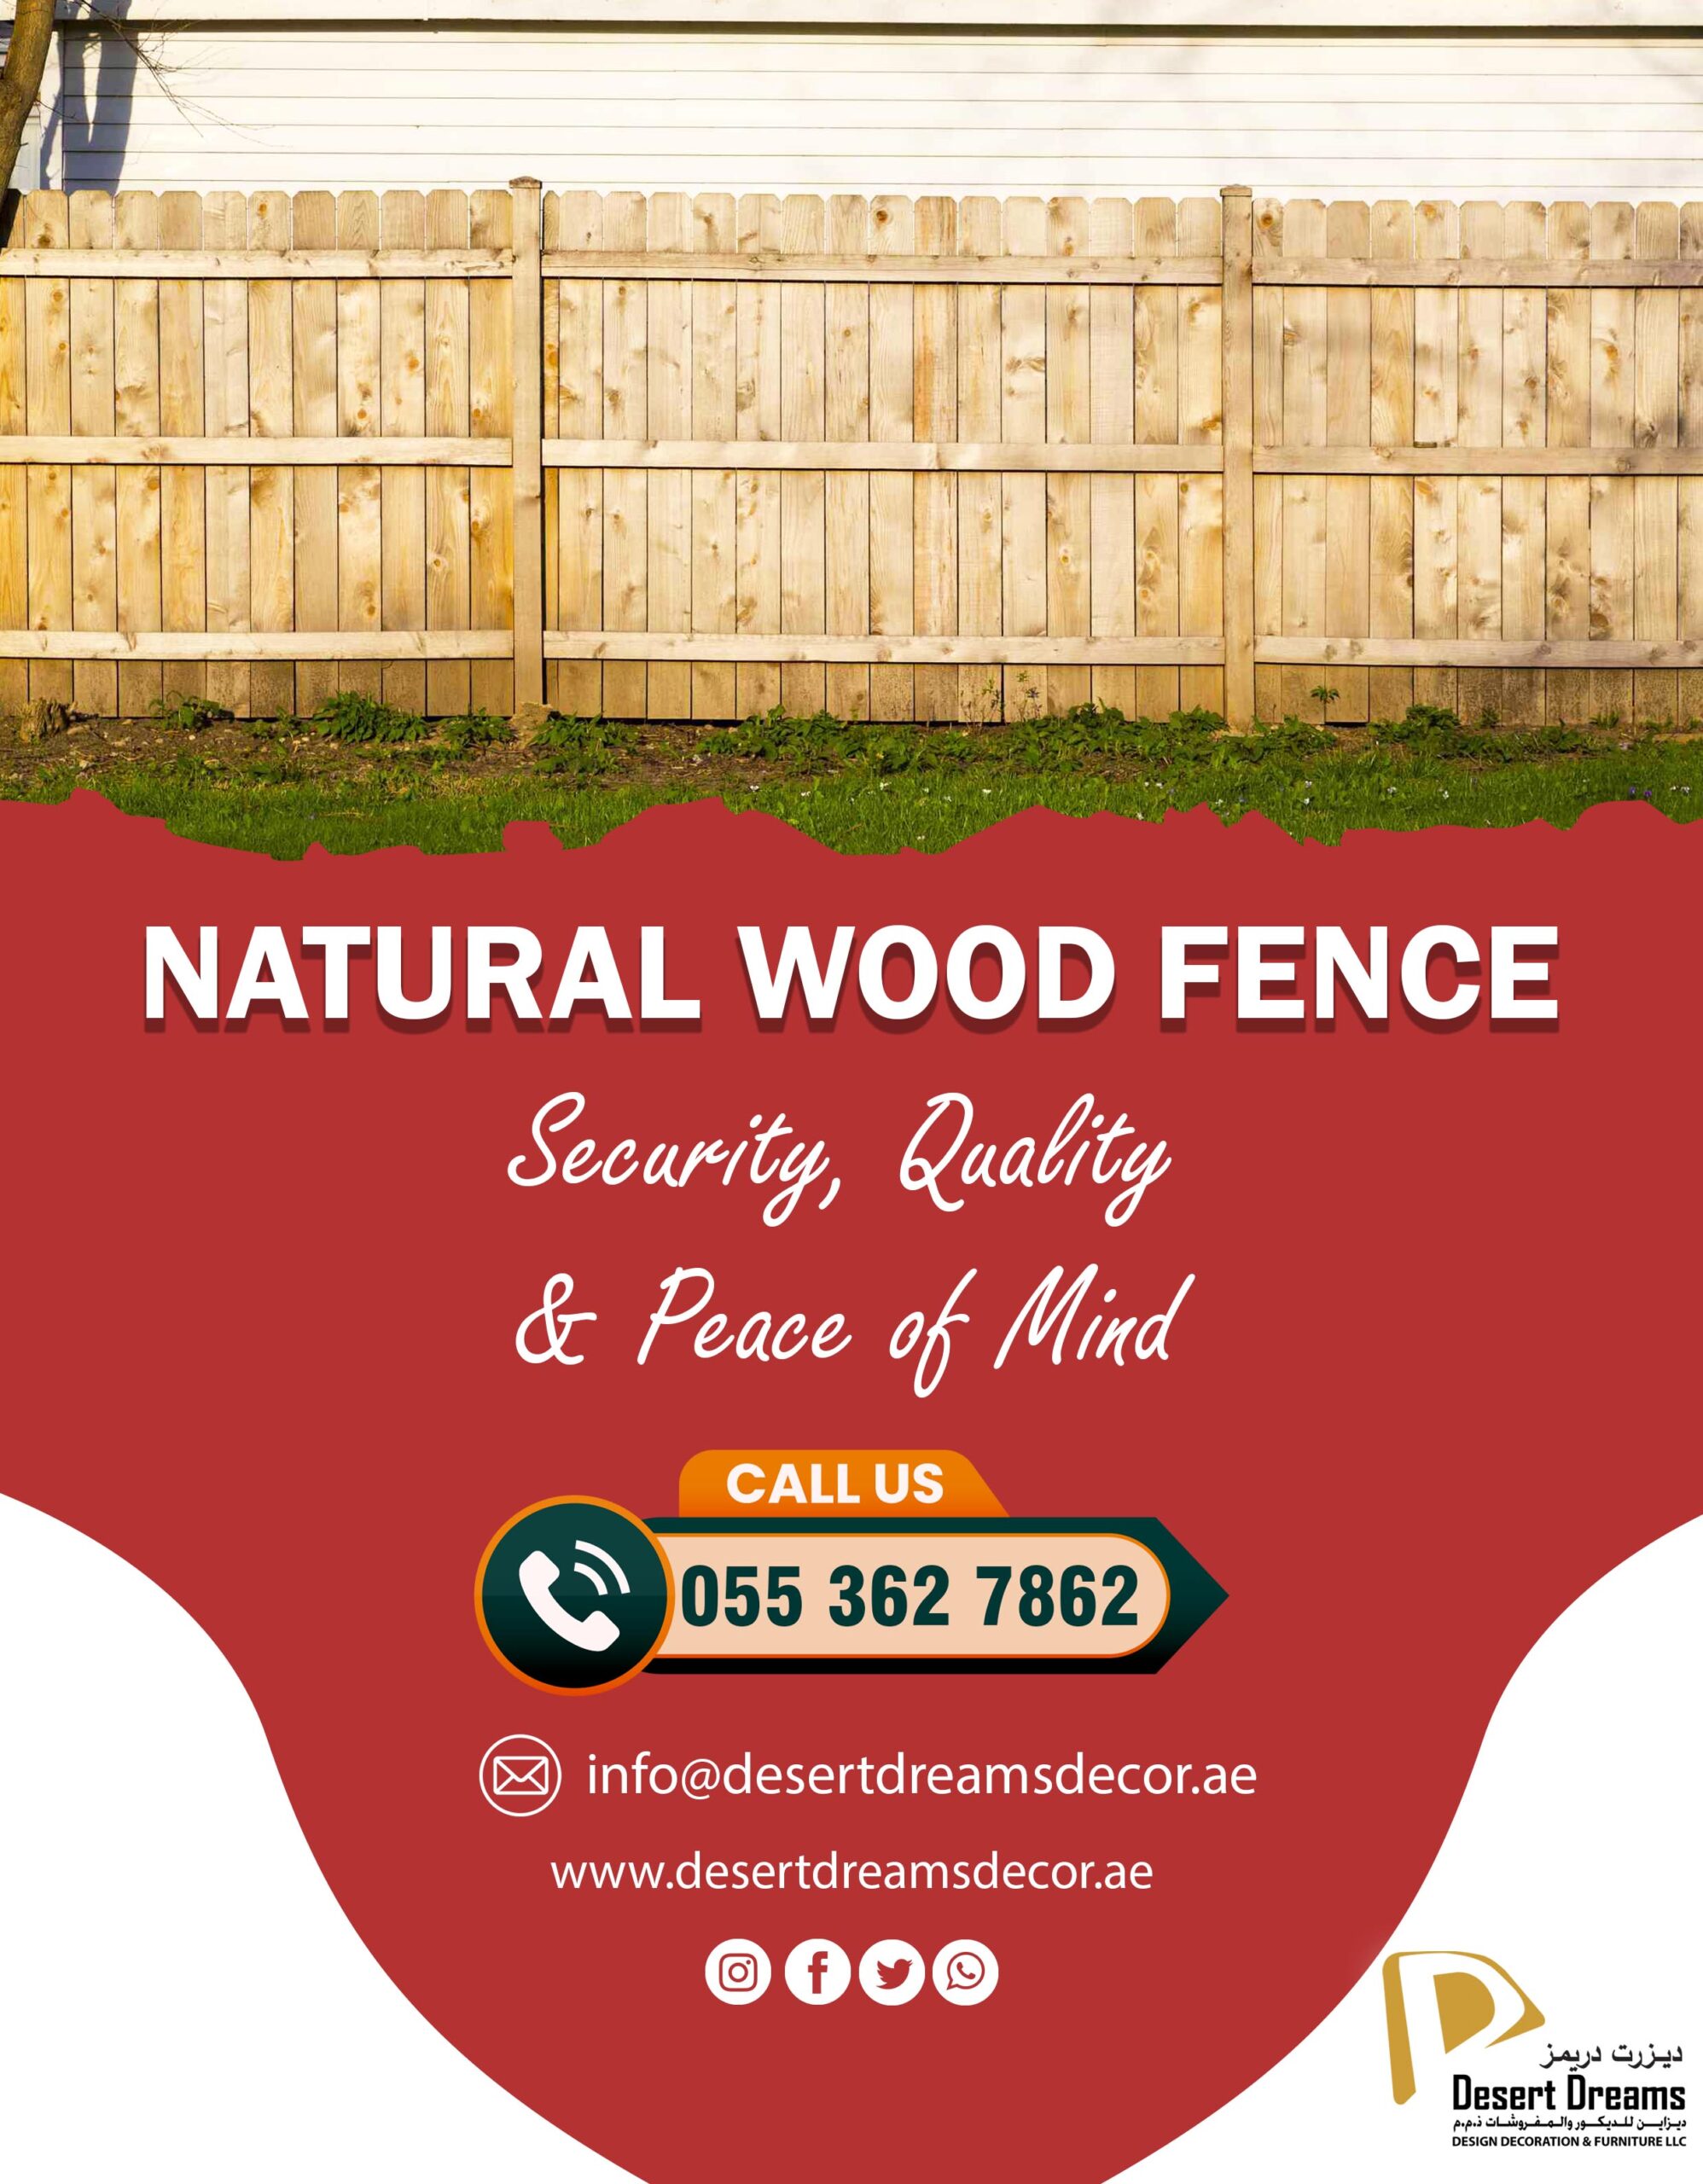 Natural Wood Fencing Dubai | White Picket Fence | Rental Fence.